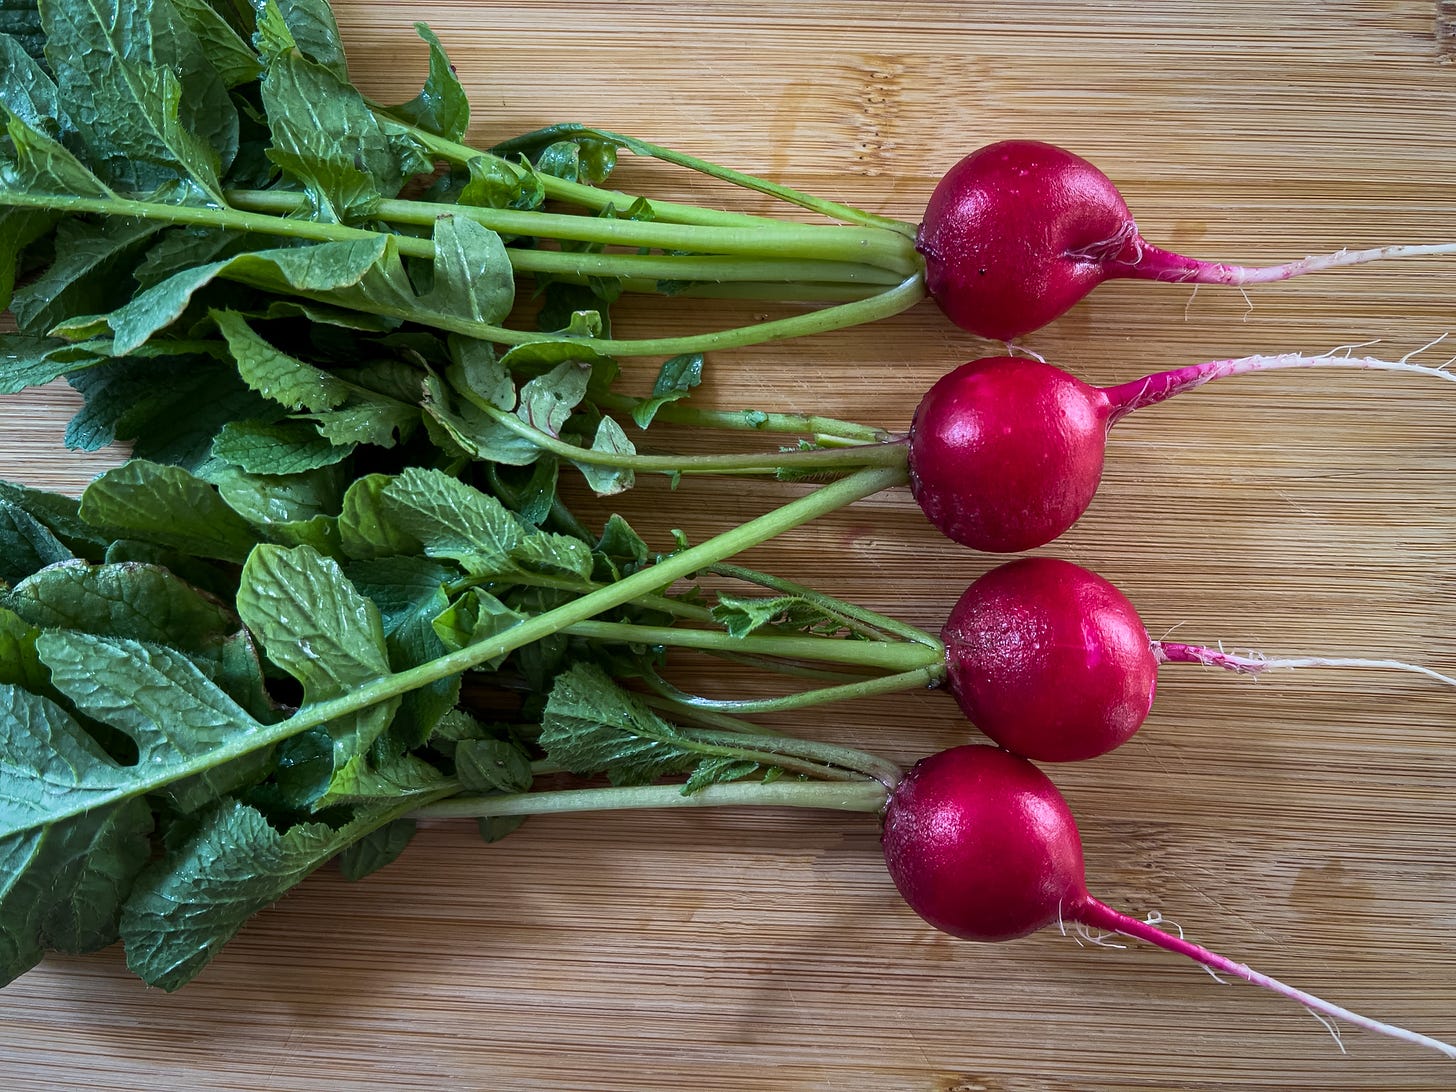 Four red radishes with their stems  and roots laying side-by-side on a wooden cutting board